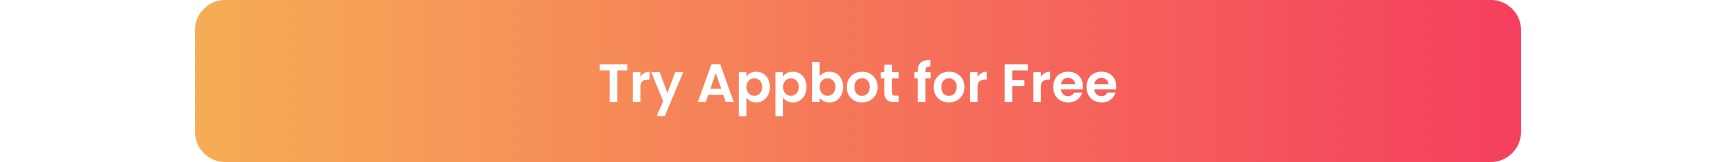 Try Appbot for Free